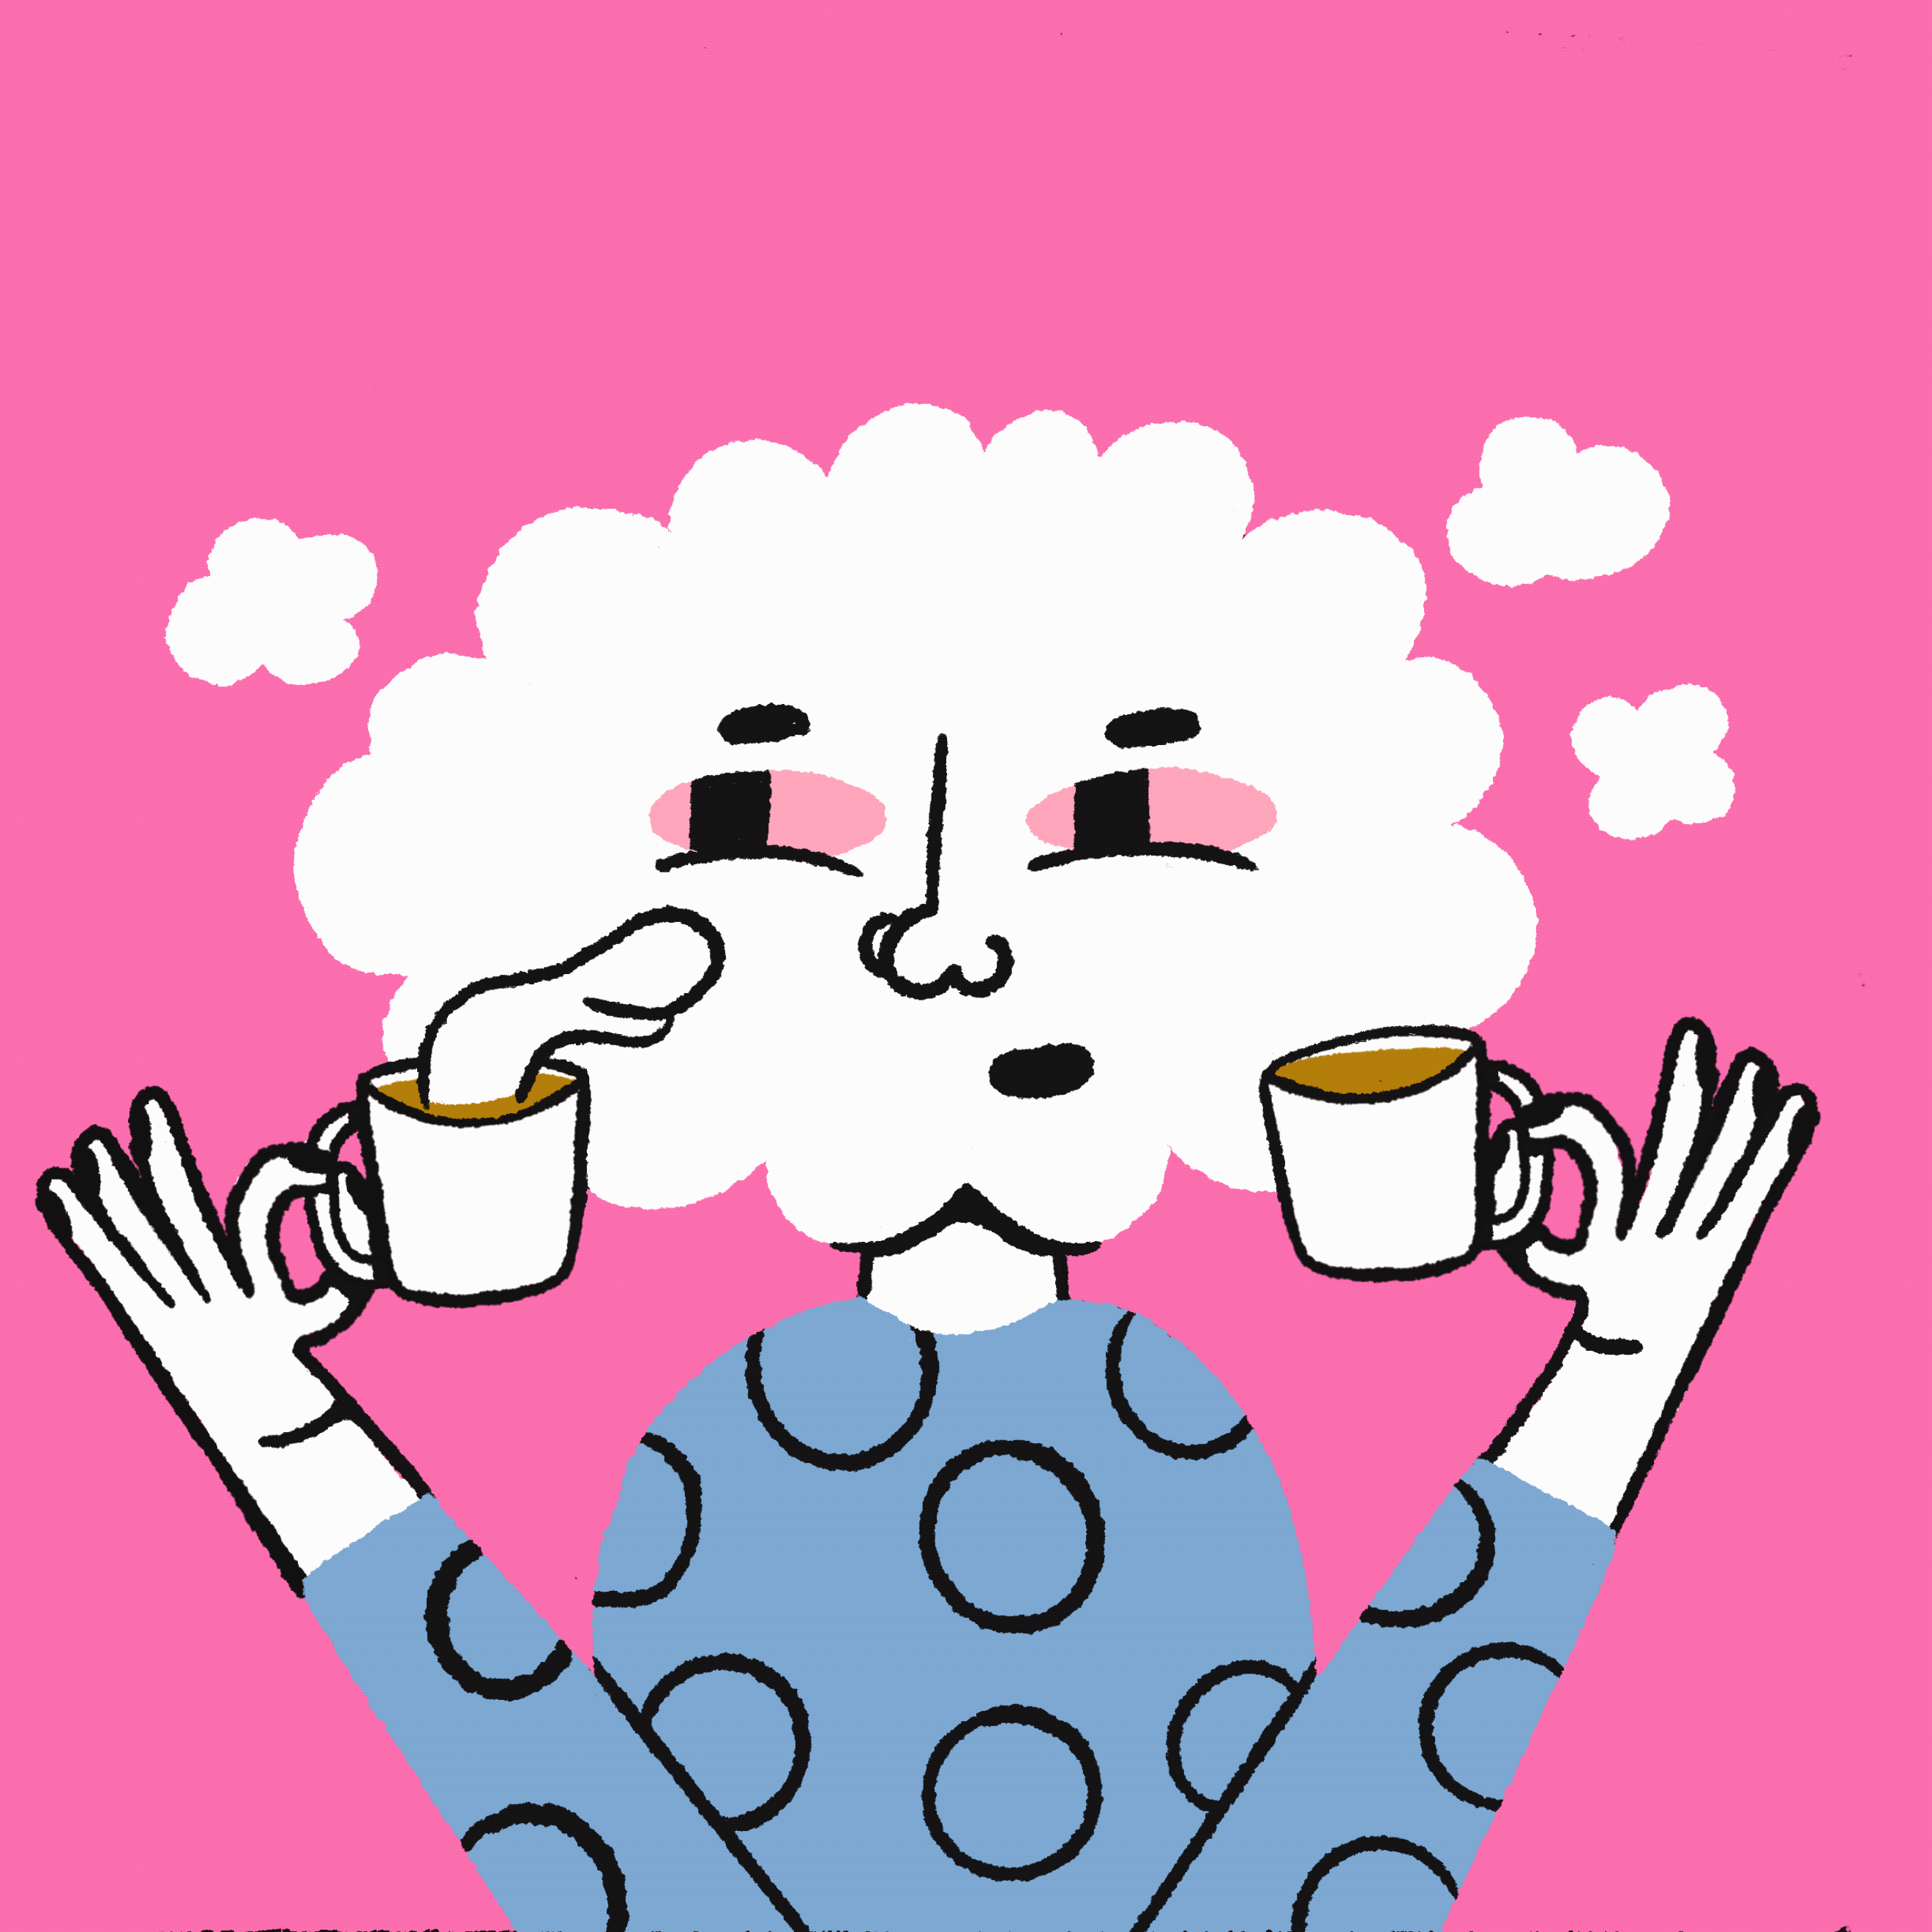 Chill buzz buzzed caffine chill cloud coffee dose drink eyes face float hands happy illustration look micro mug peace person smile